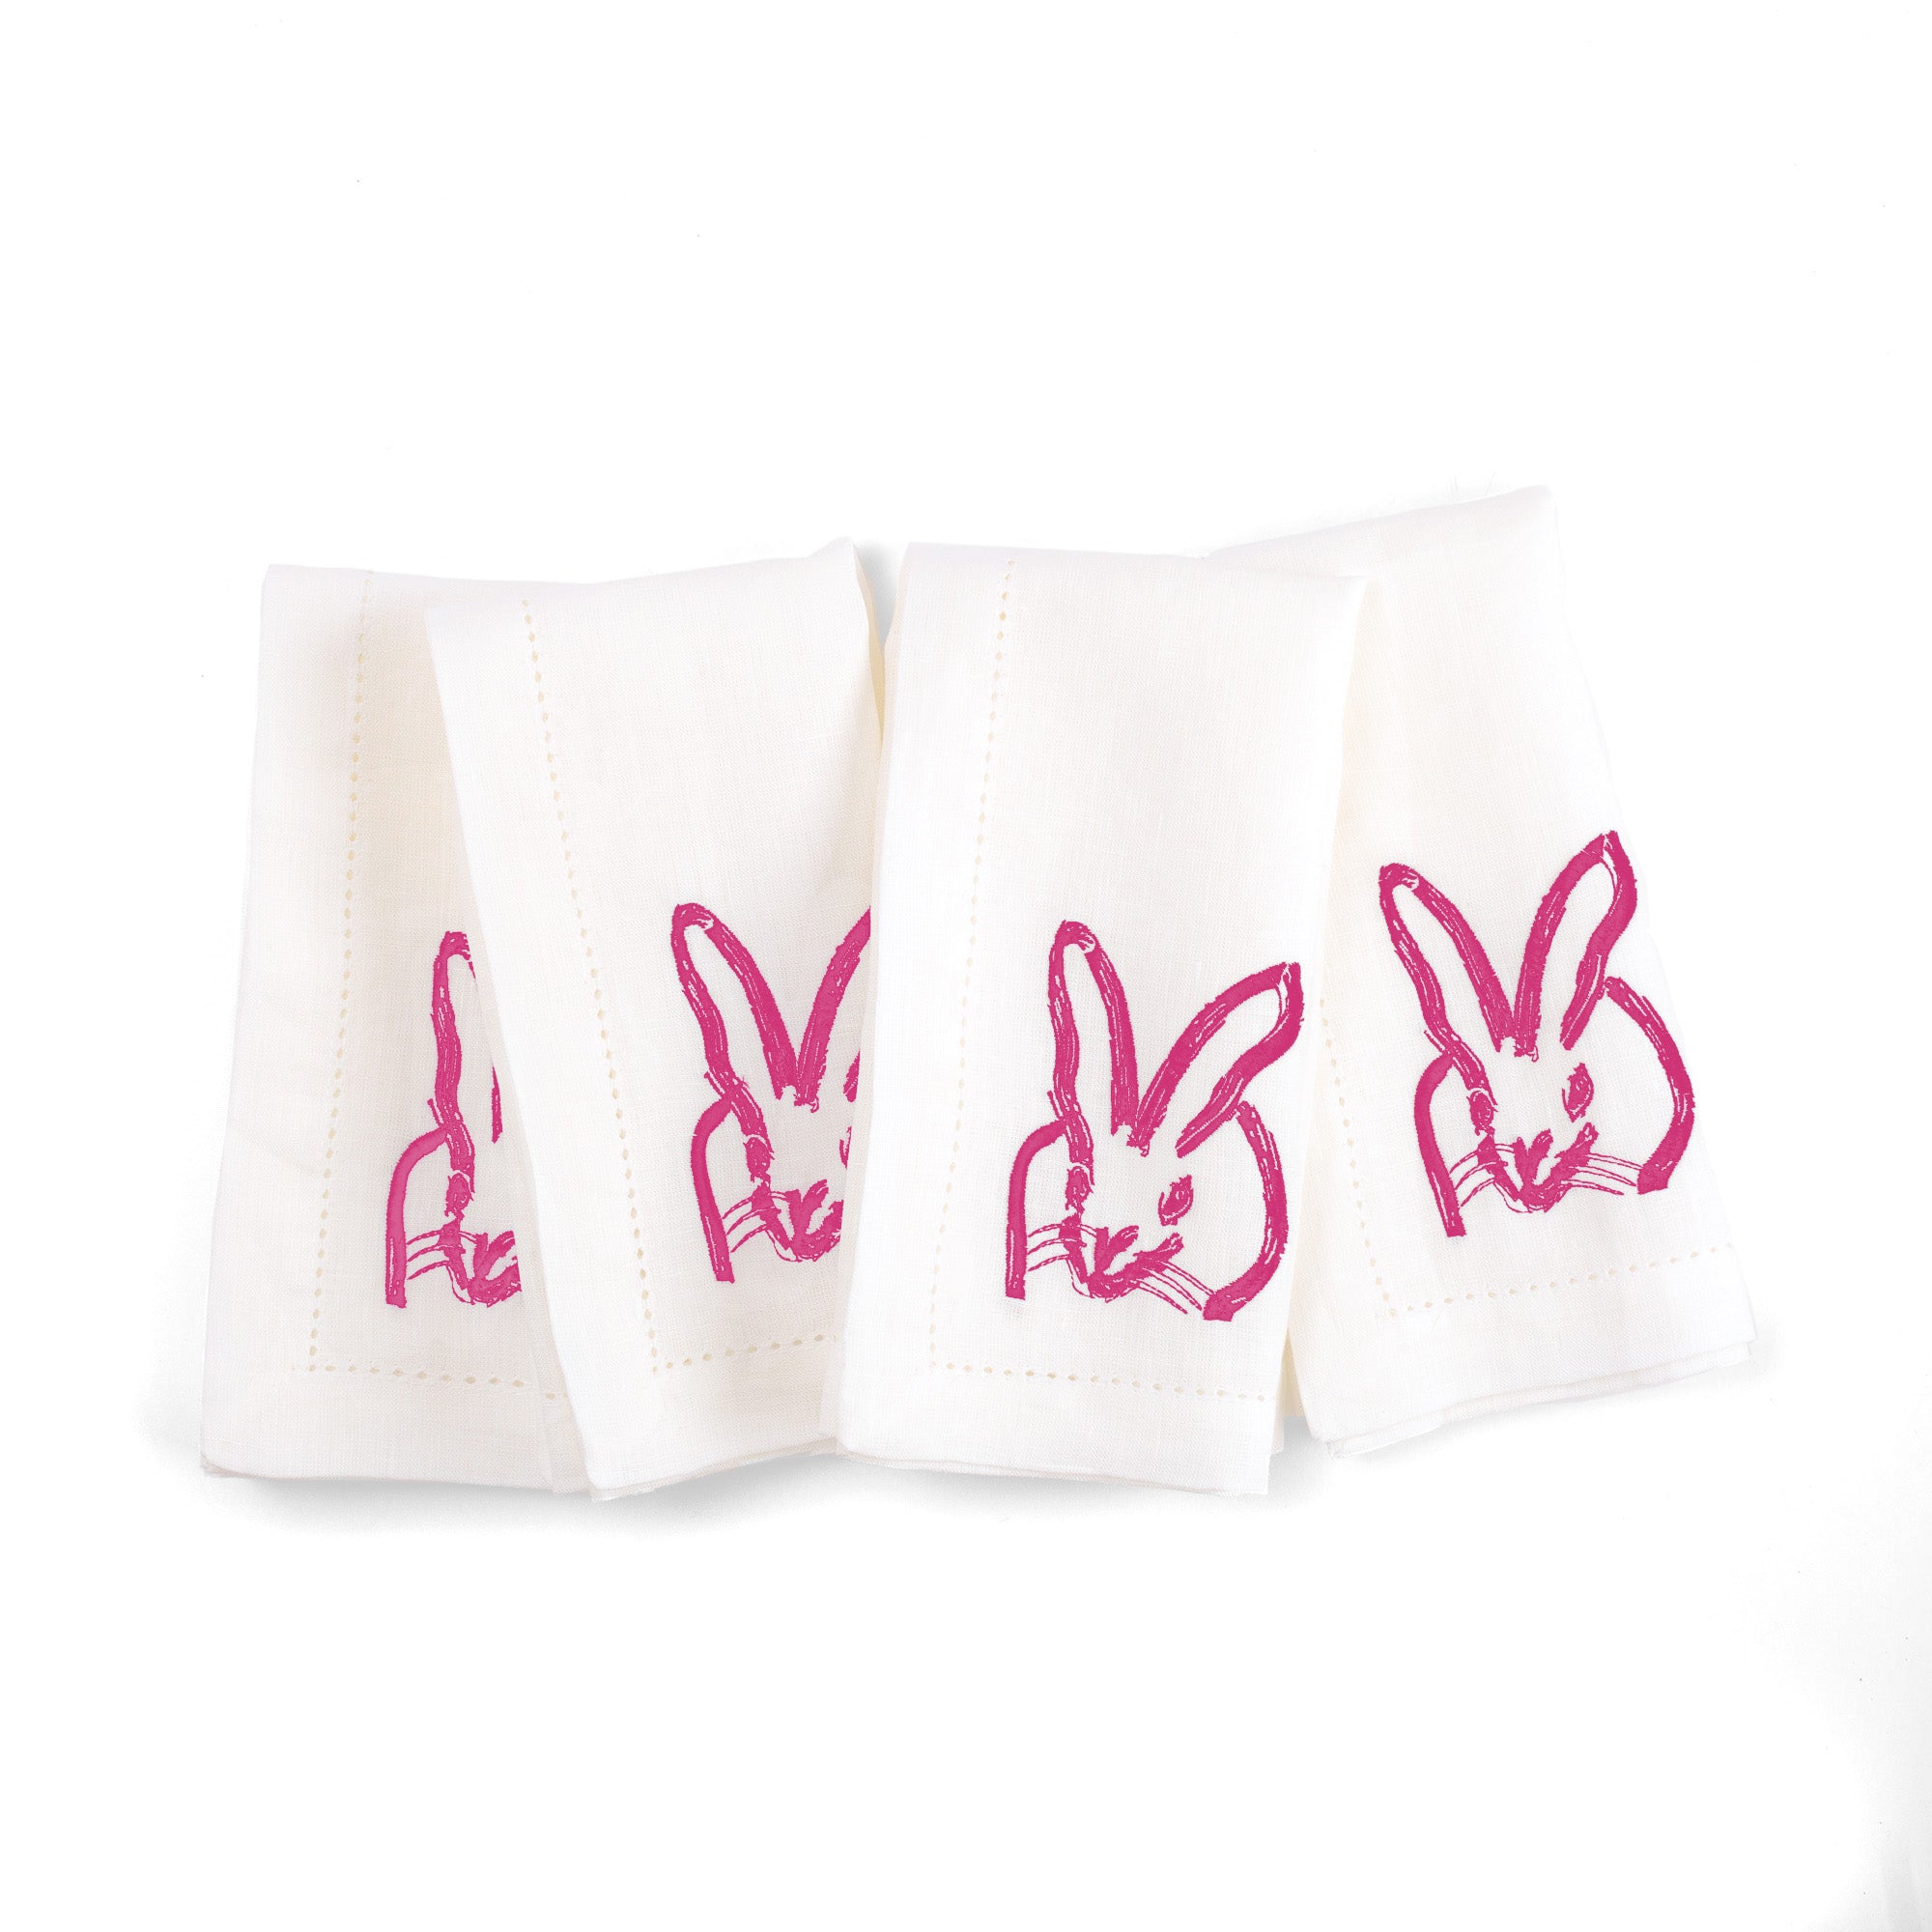 Painted Bunny Embroidered Linen Dinner Napkin, White with Pink